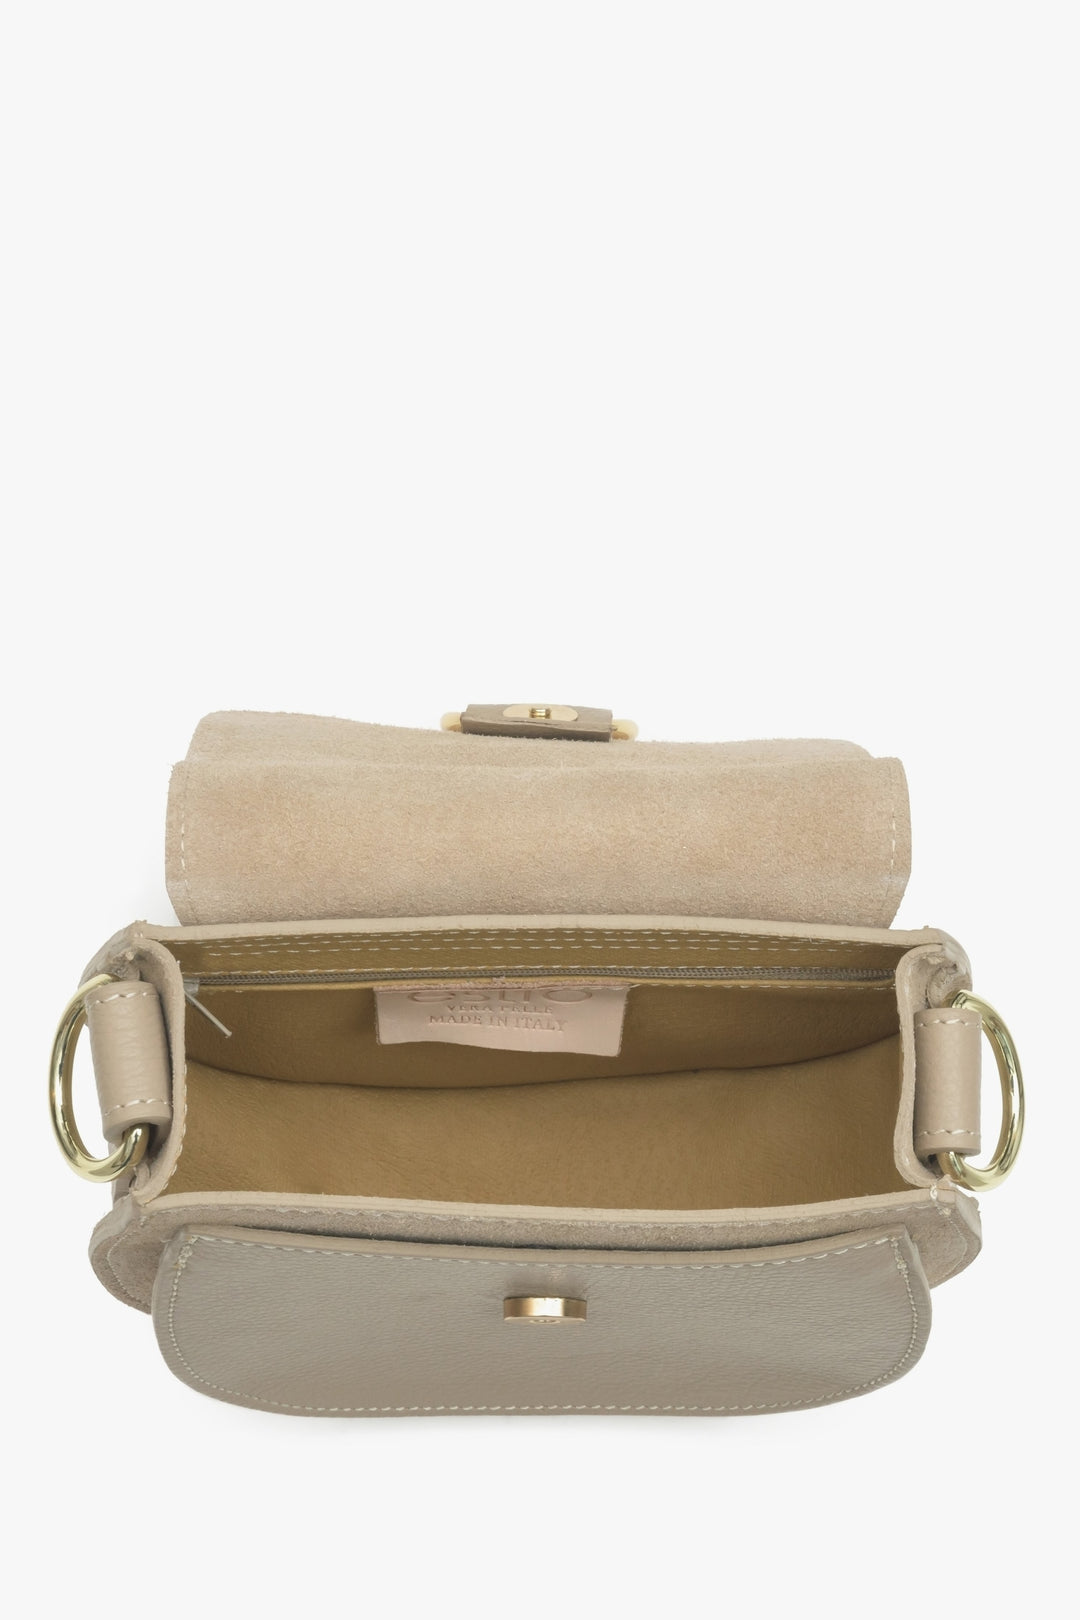 Women's beige shoulder bag by Estro handmade in Italy - close up on the lining.